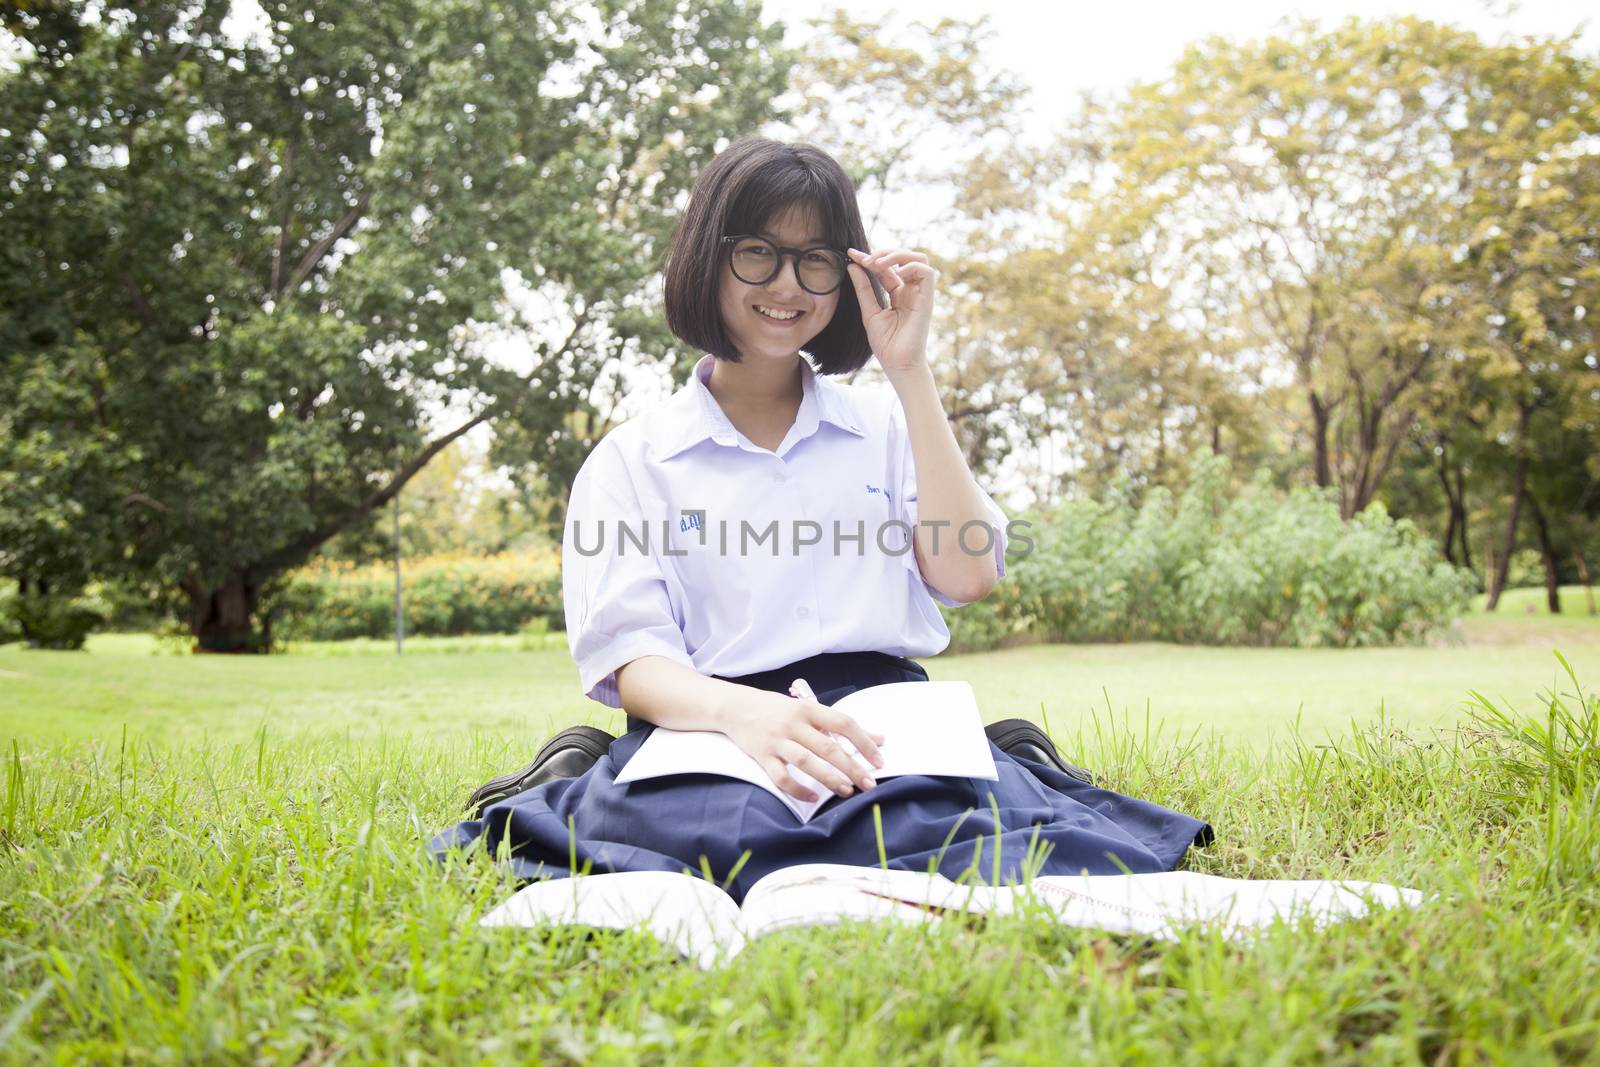 Schoolgirl was reading on the lawn. Smiling and happy within the park.